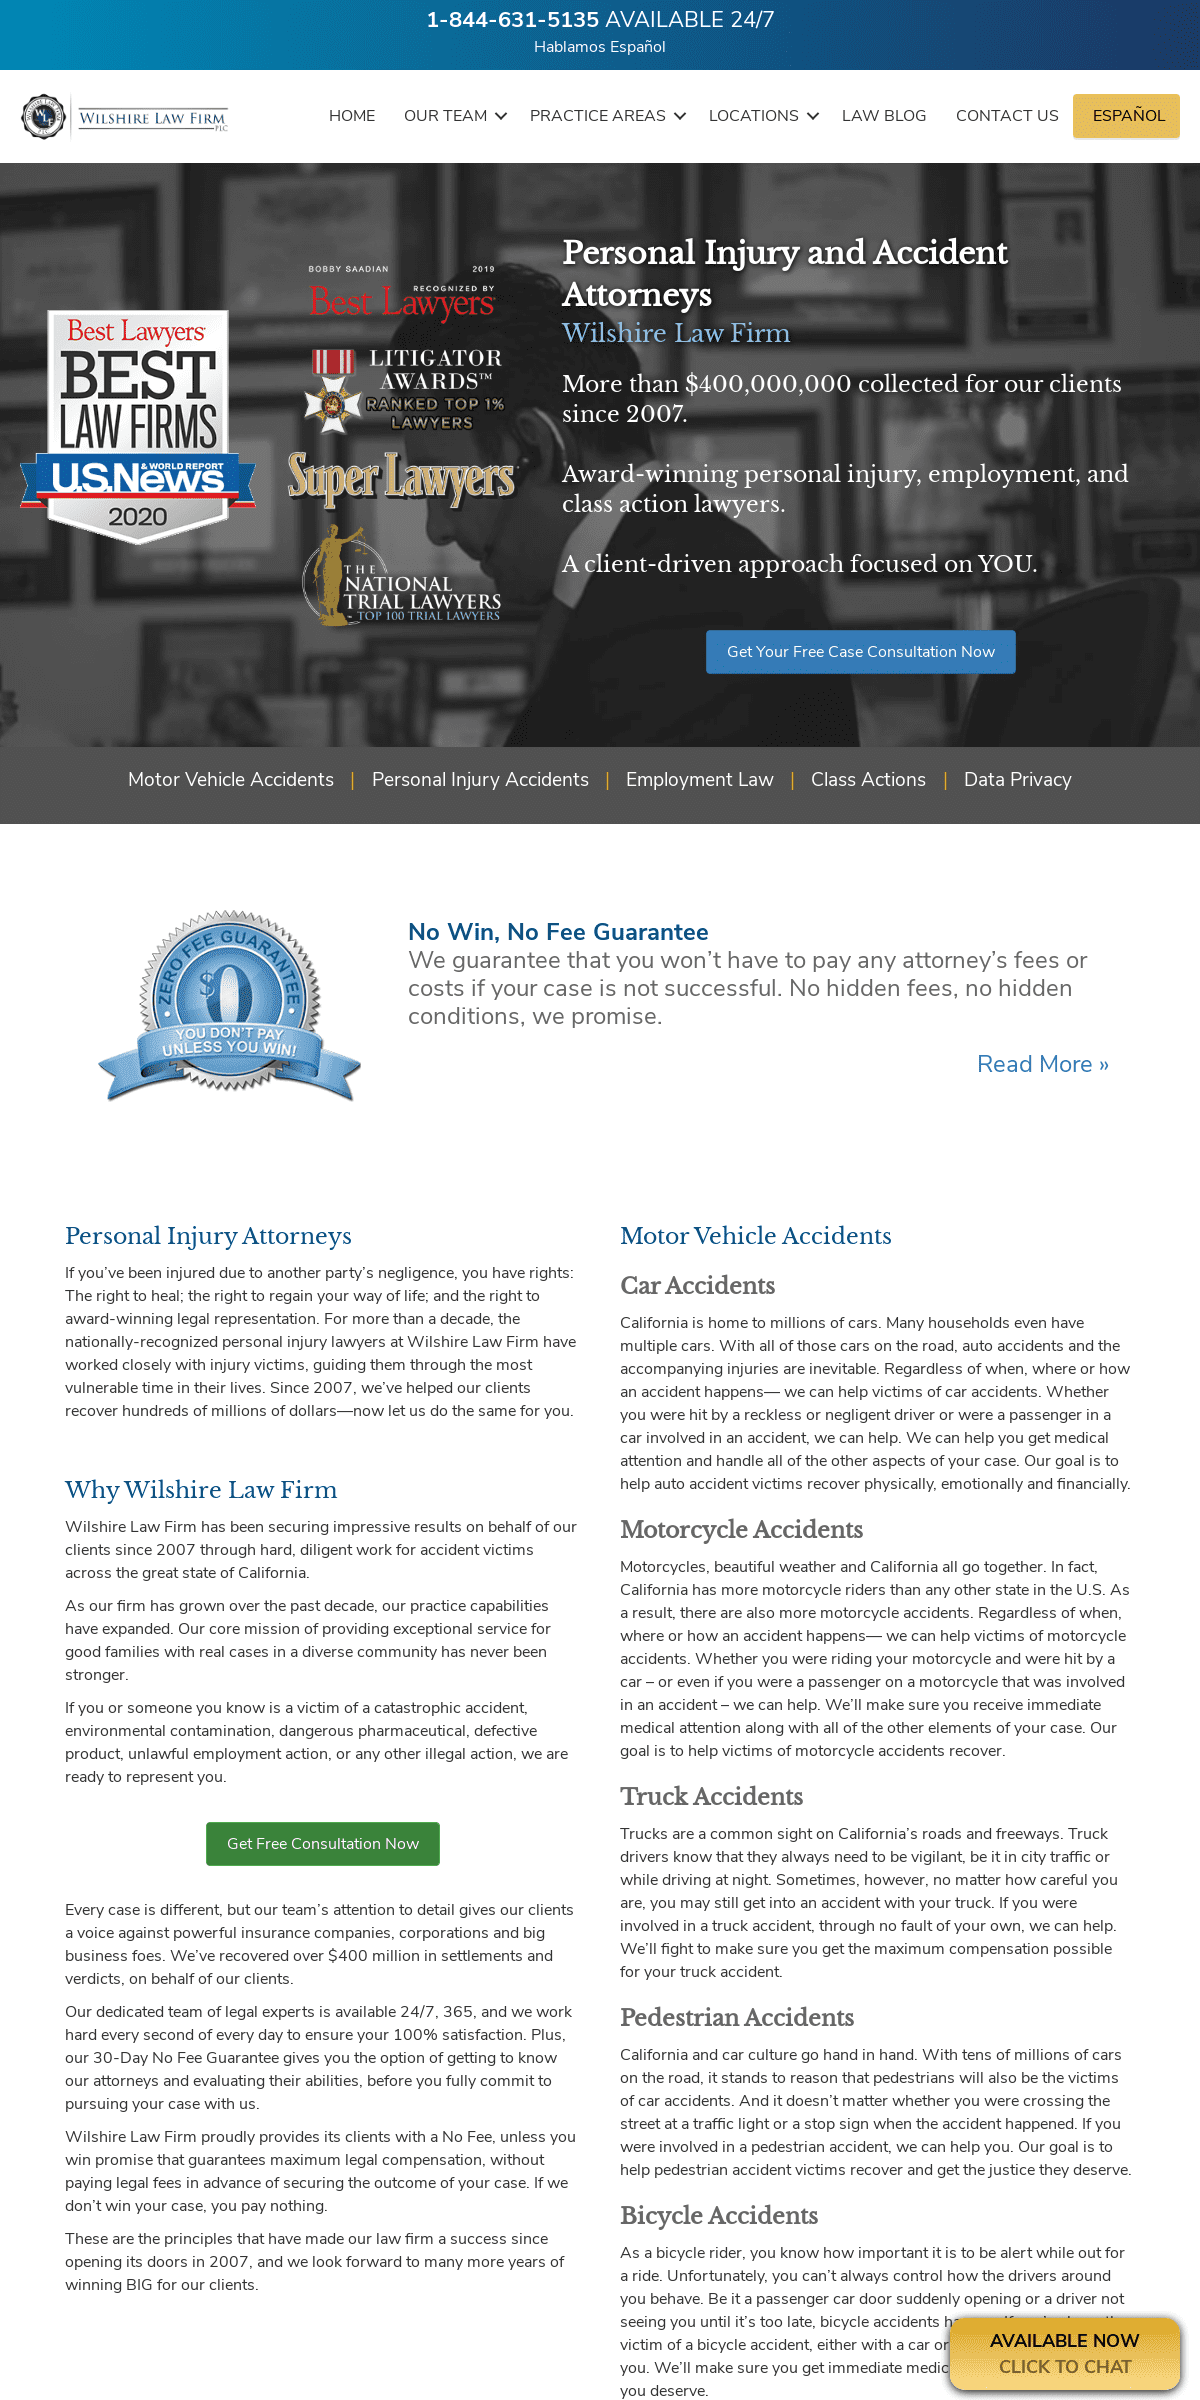 A complete backup of wilshirelawfirm.com